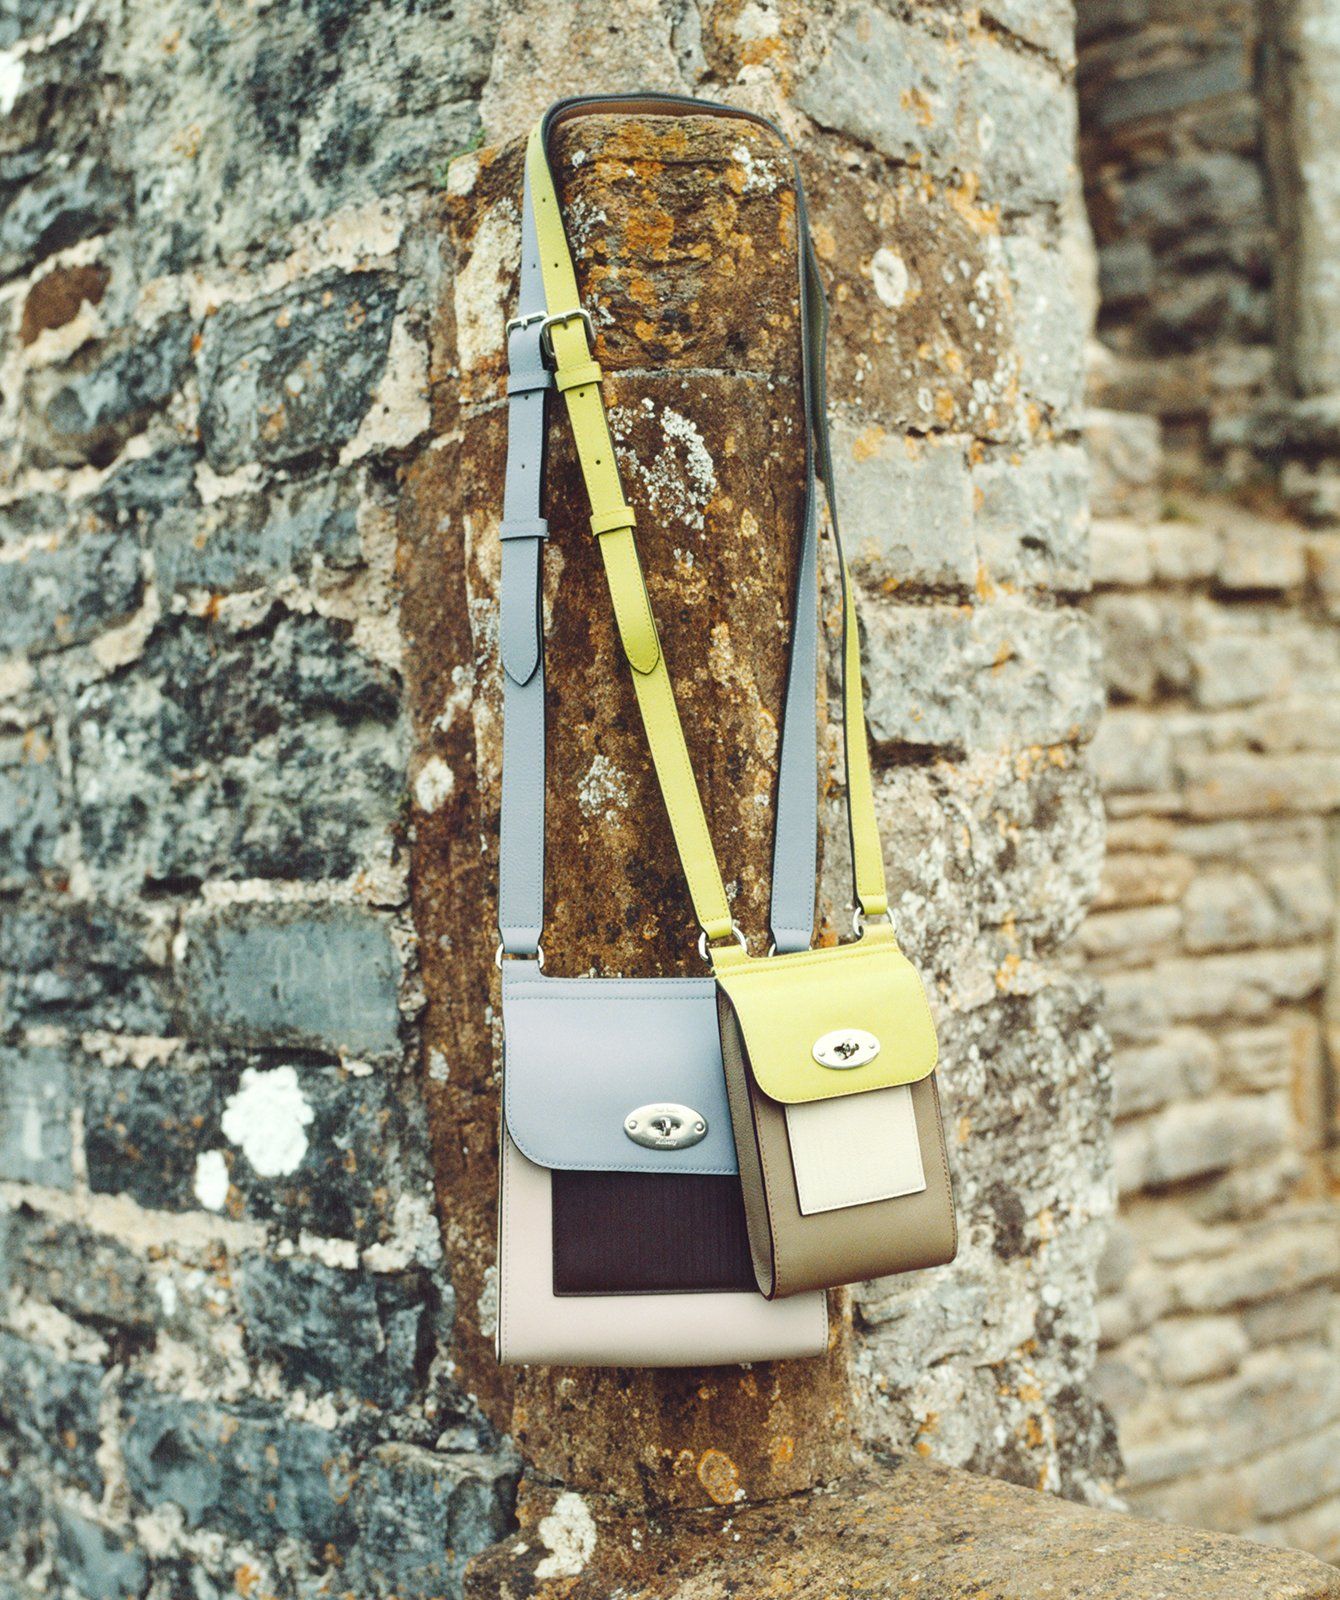 Mulberry x Paul Smith Collaboration, New Collection